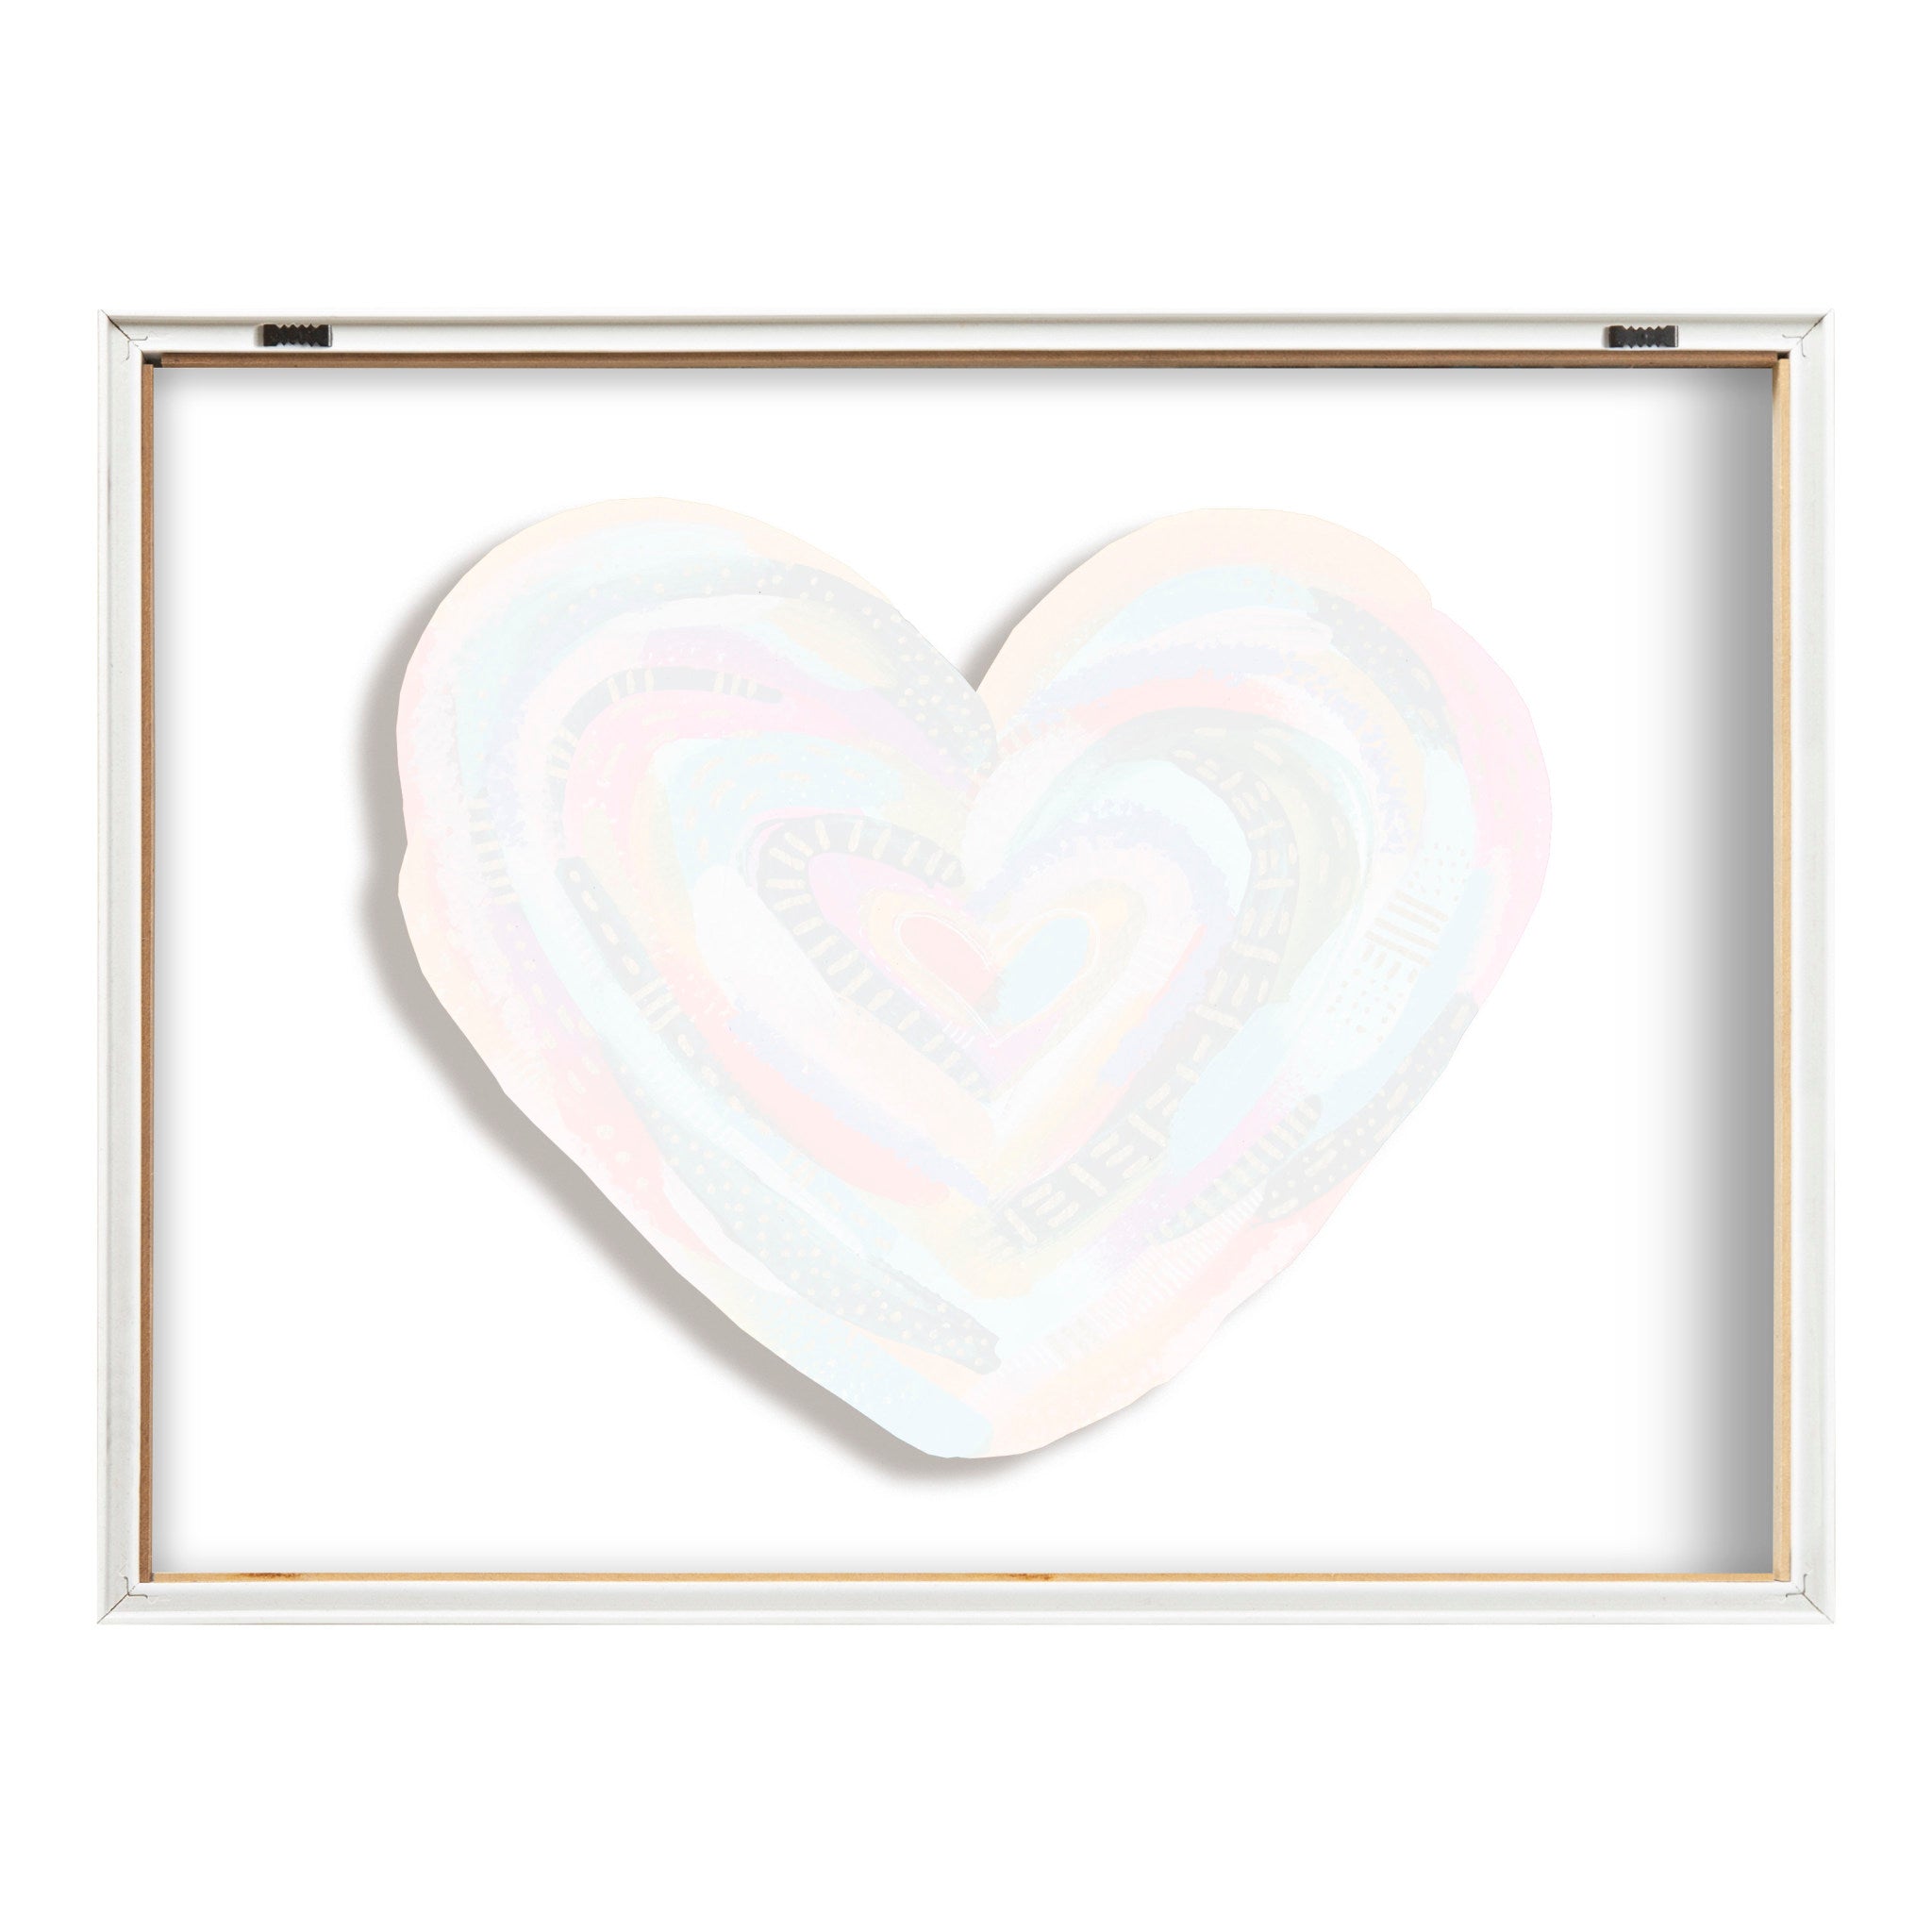 Blake Labyrinth Heart Framed Printed Glass by Jessi Raulet of Ettavee